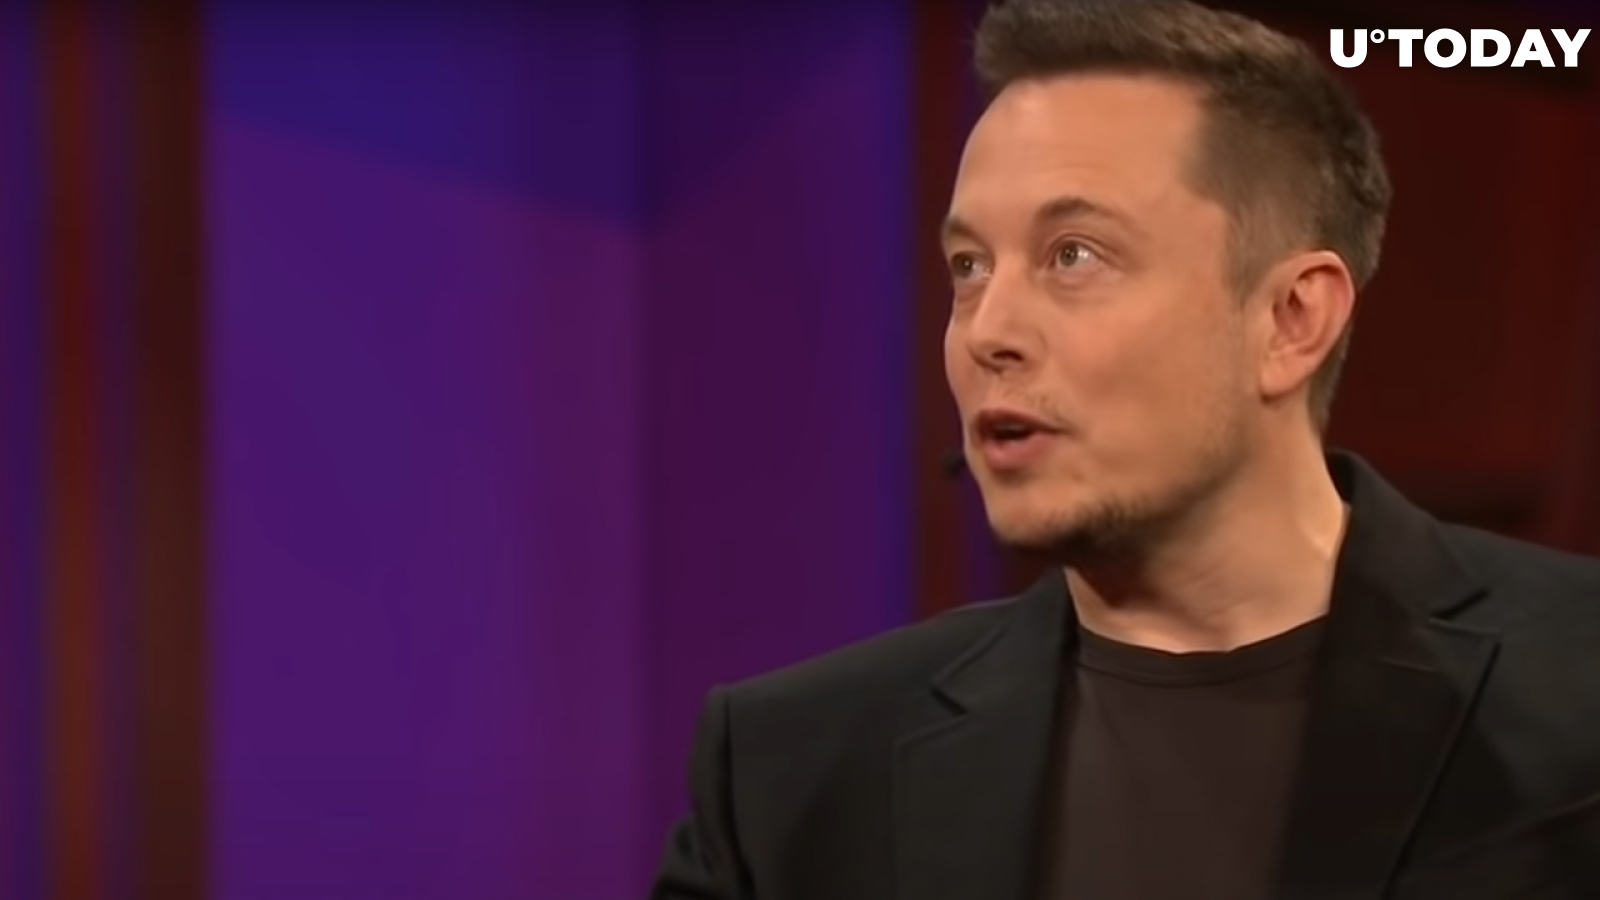 Elon Musk Joins Twitter Board, What Could It Mean for DOGE?